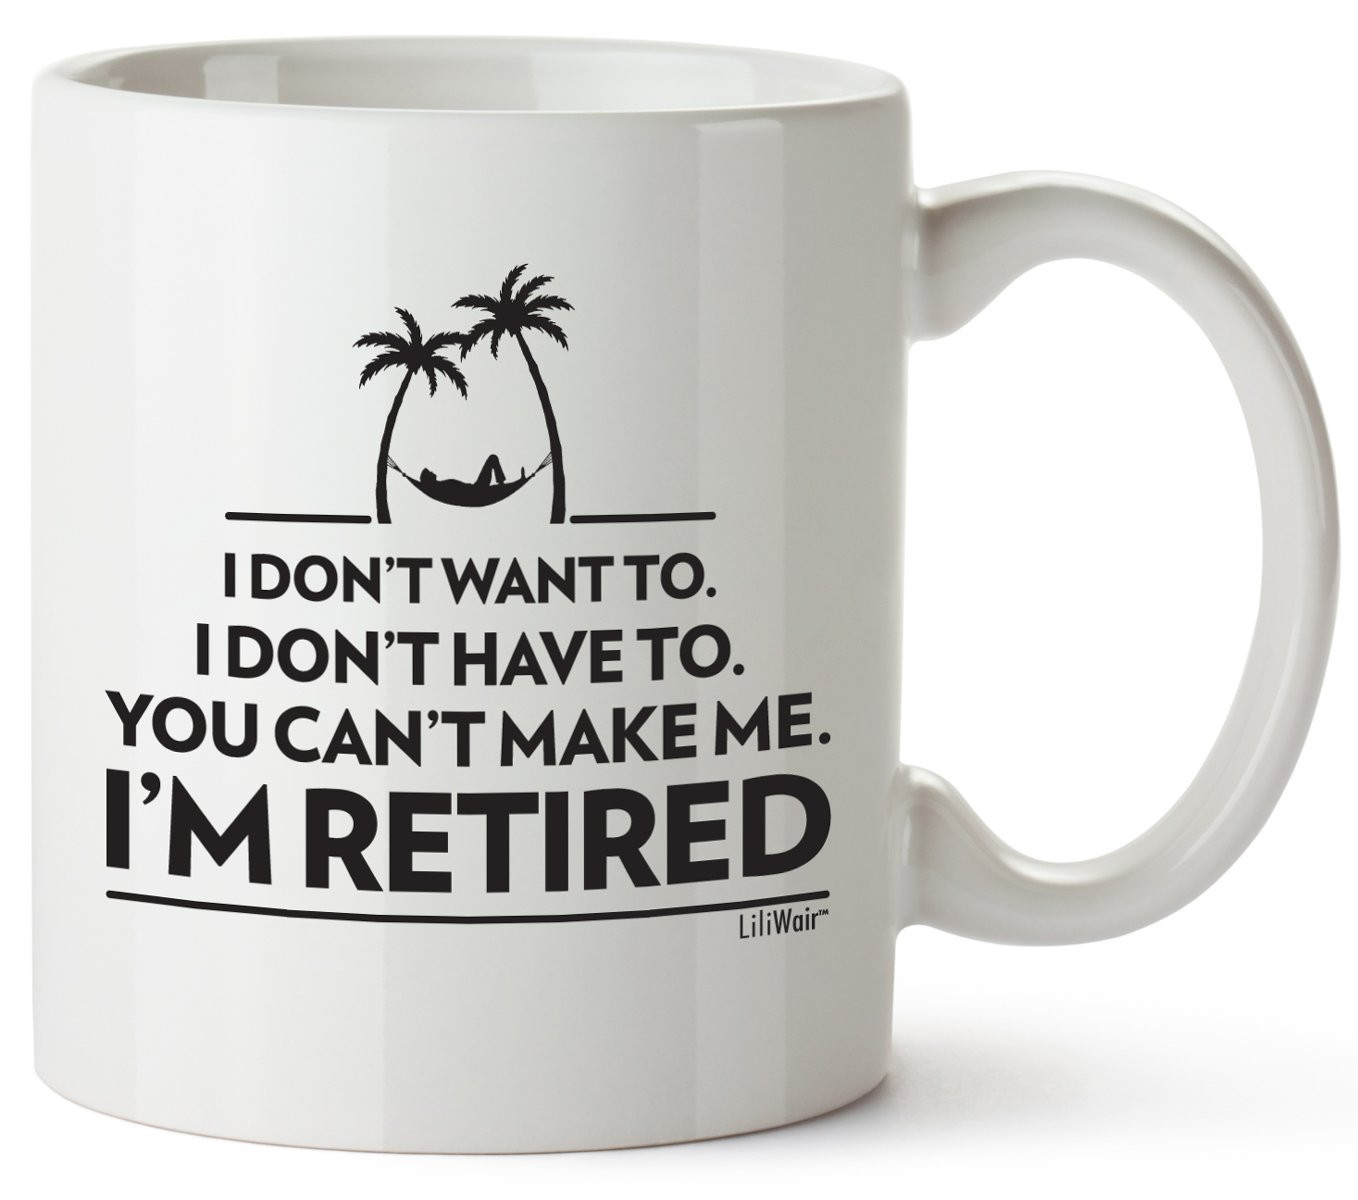 Retirement Gift Ideas For Couples
 Retirement Gifts for Family Amazon